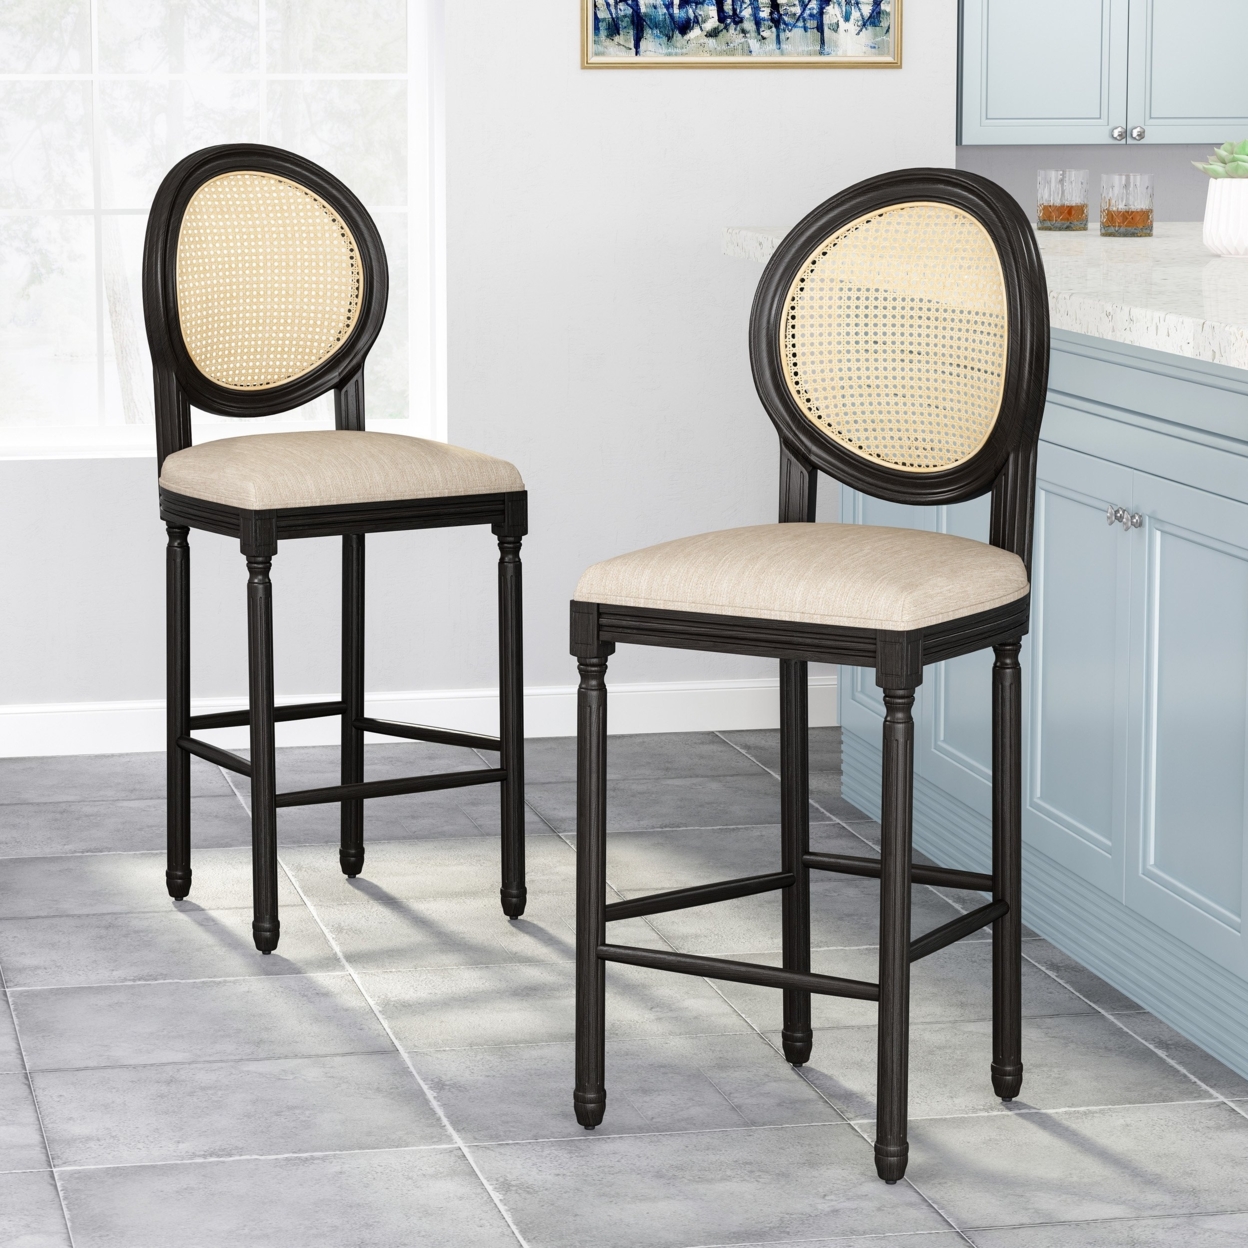 Towner French Country Wooden Barstools With Upholstered Seating (Set Of 2) - Black/beige/natural